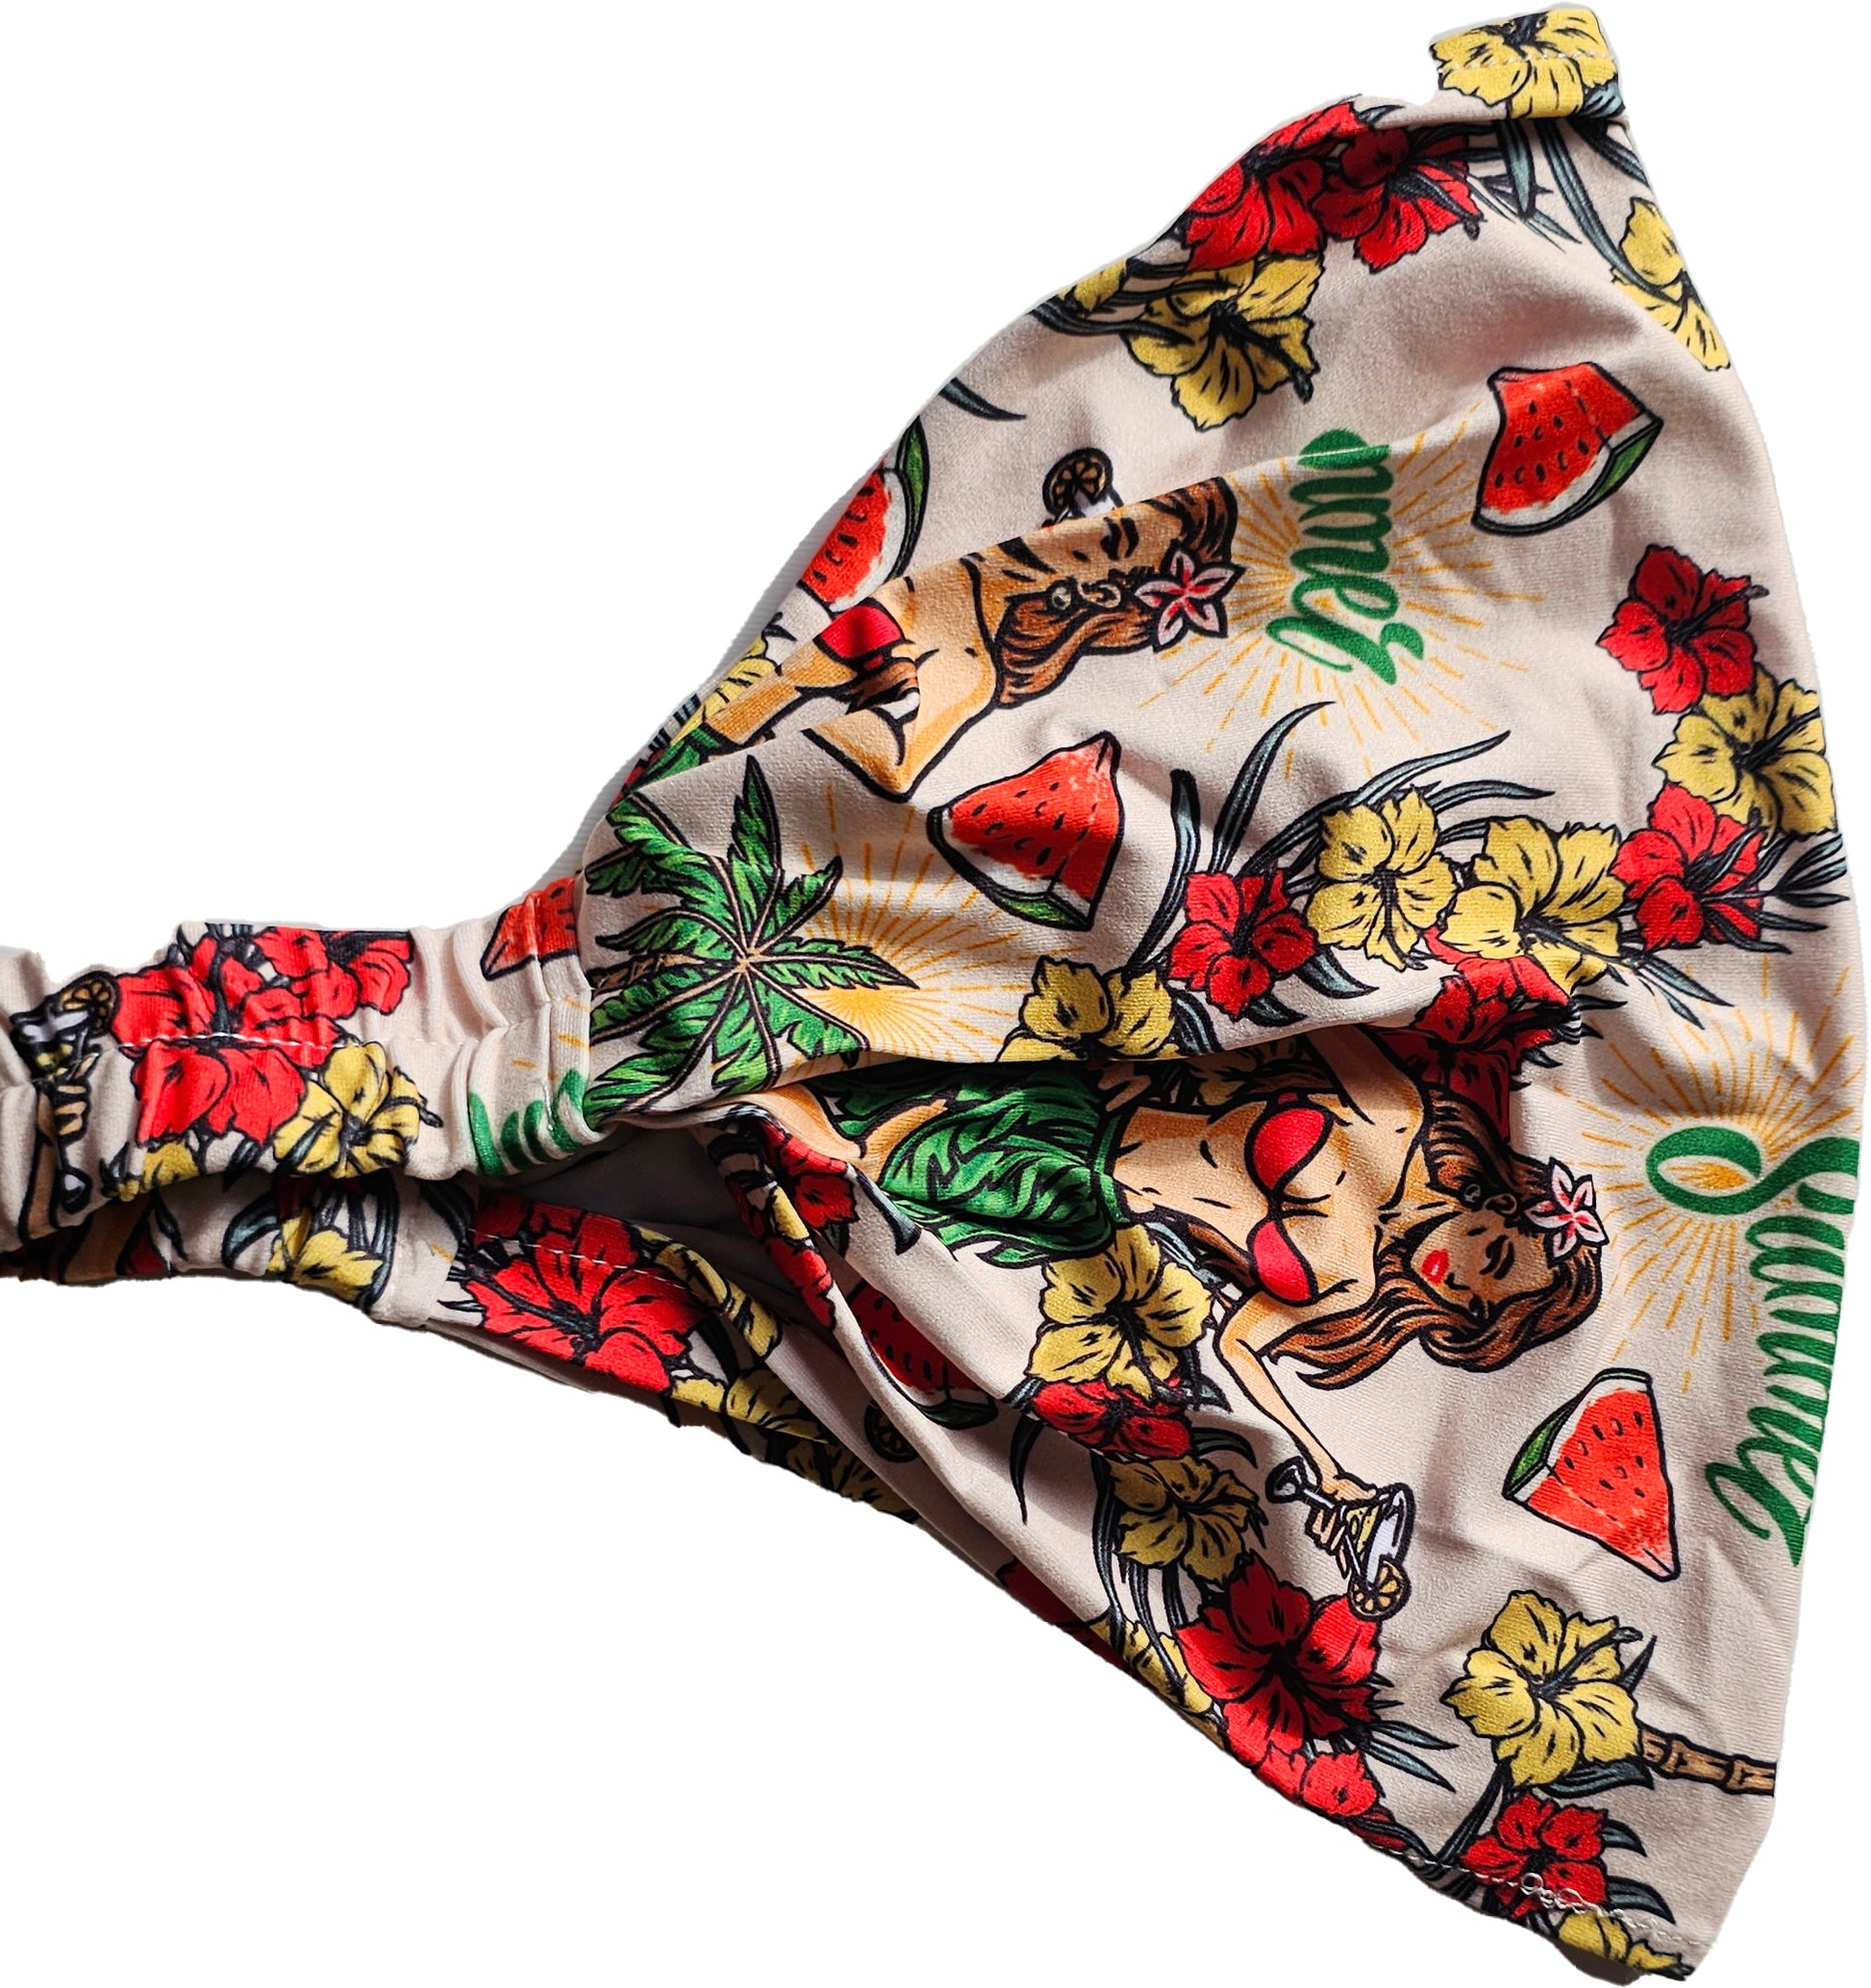 a bow tie with a hula girl hawaiian design  design on it